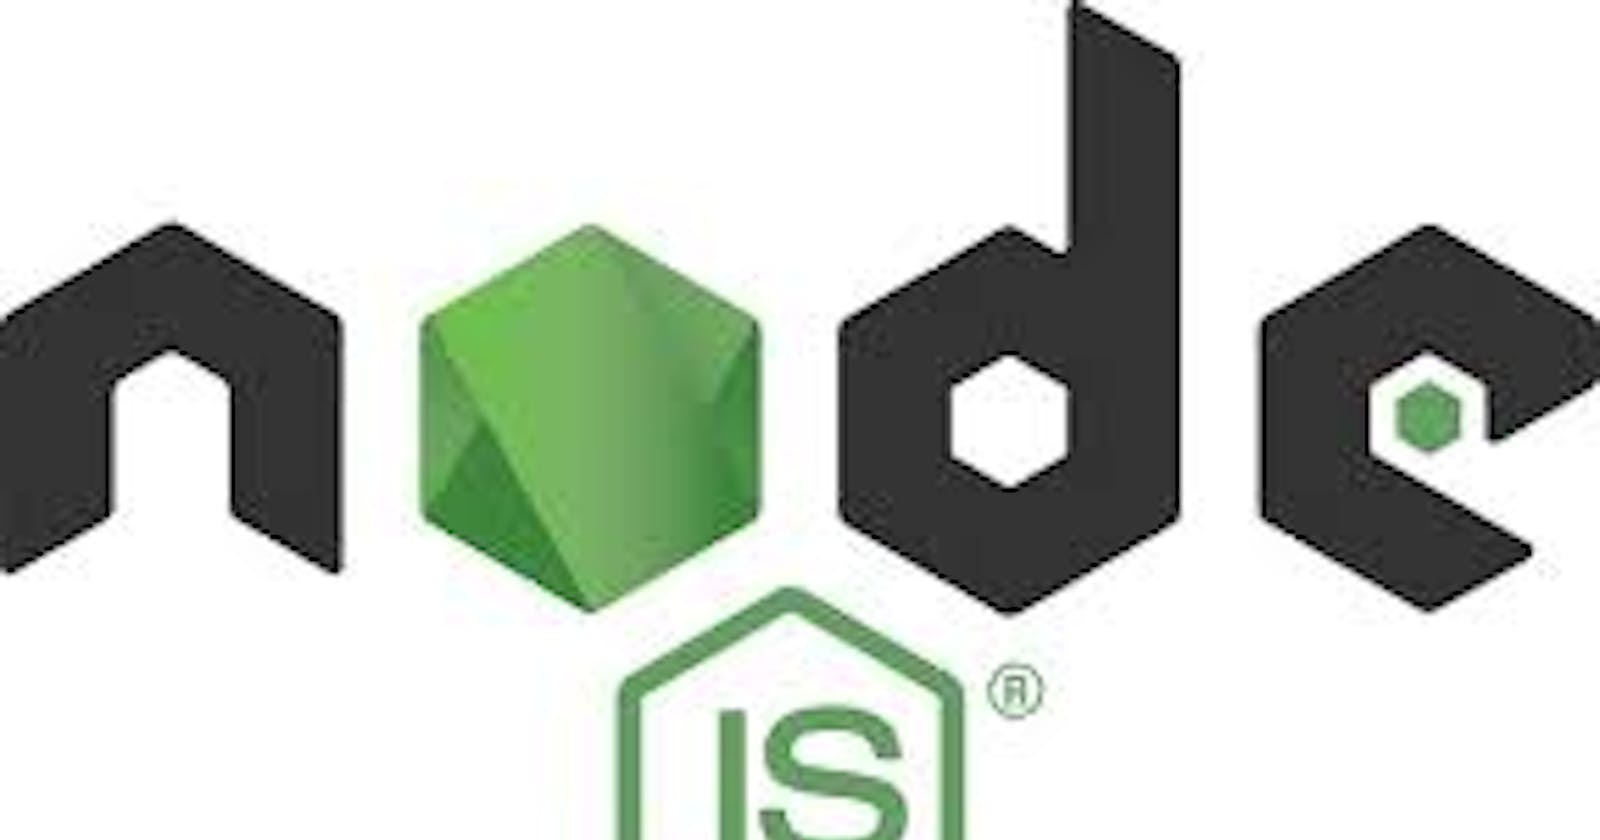 GETTING STARTED WITH NODE JS